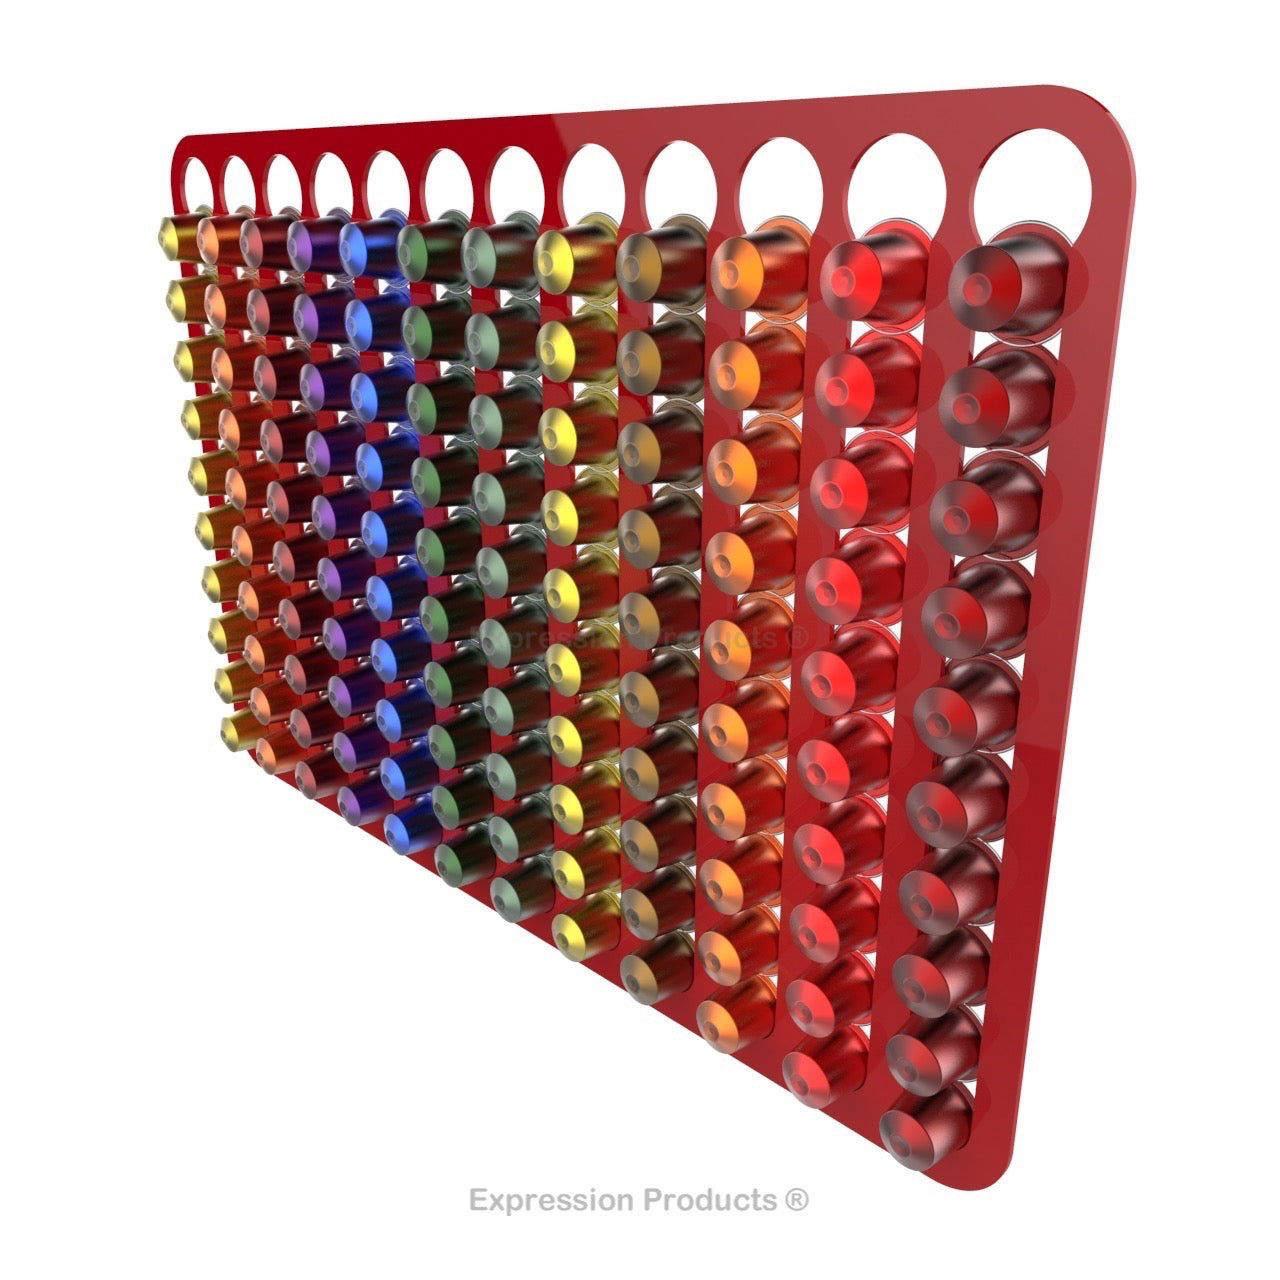 Magnetic Nespresso Original Line coffee pod holder shown in red holding 120 pods